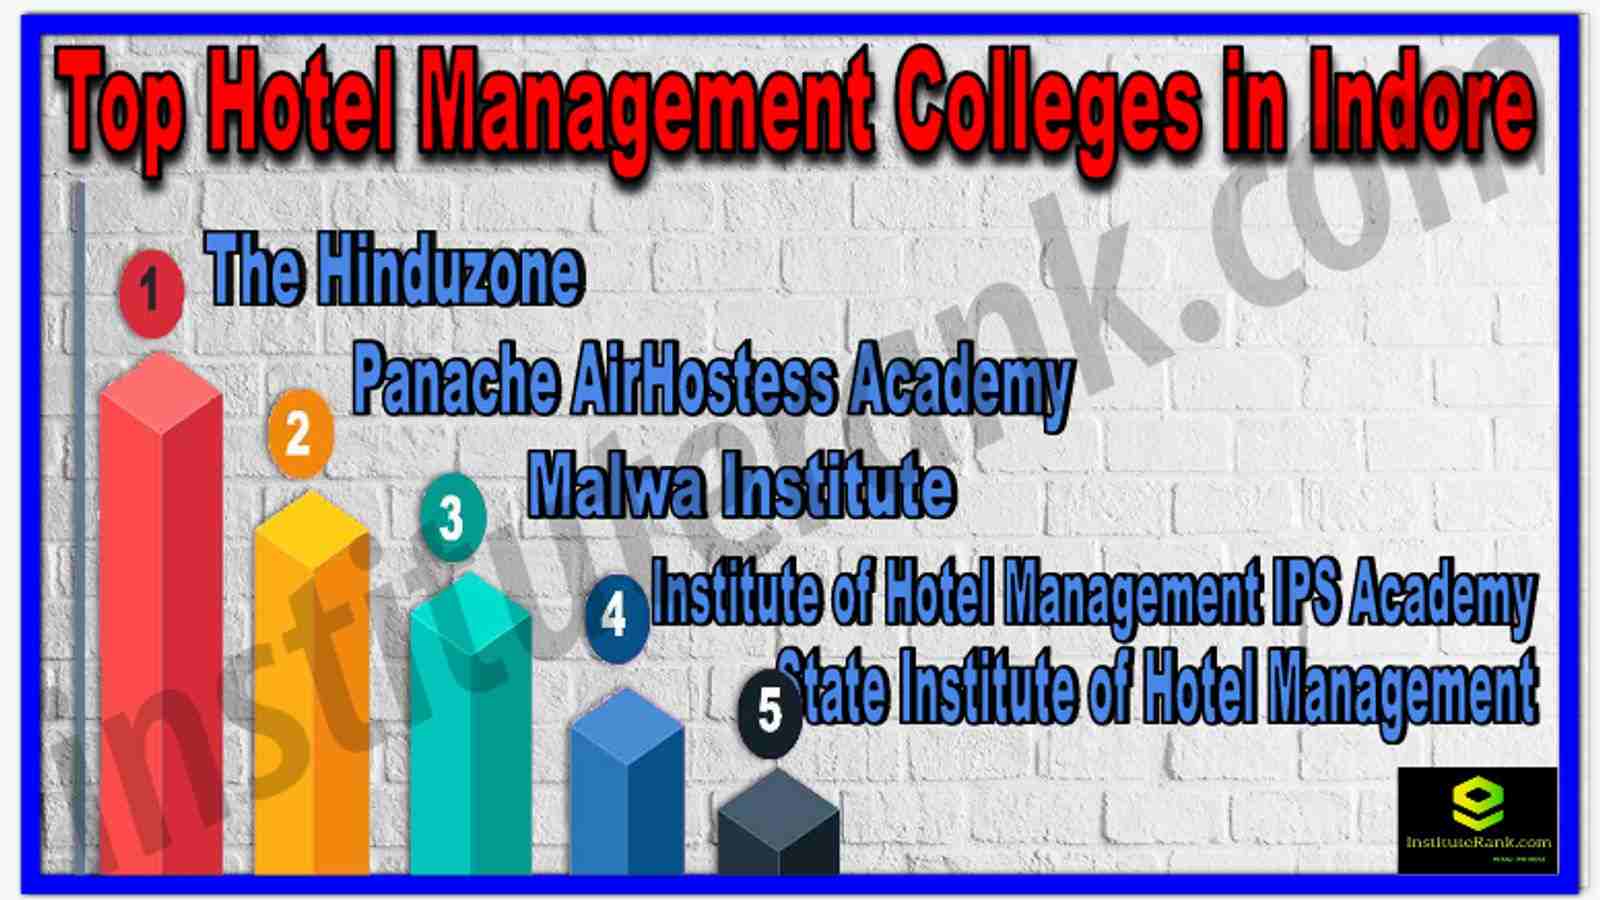 Top Hotel Management Colleges in Indore